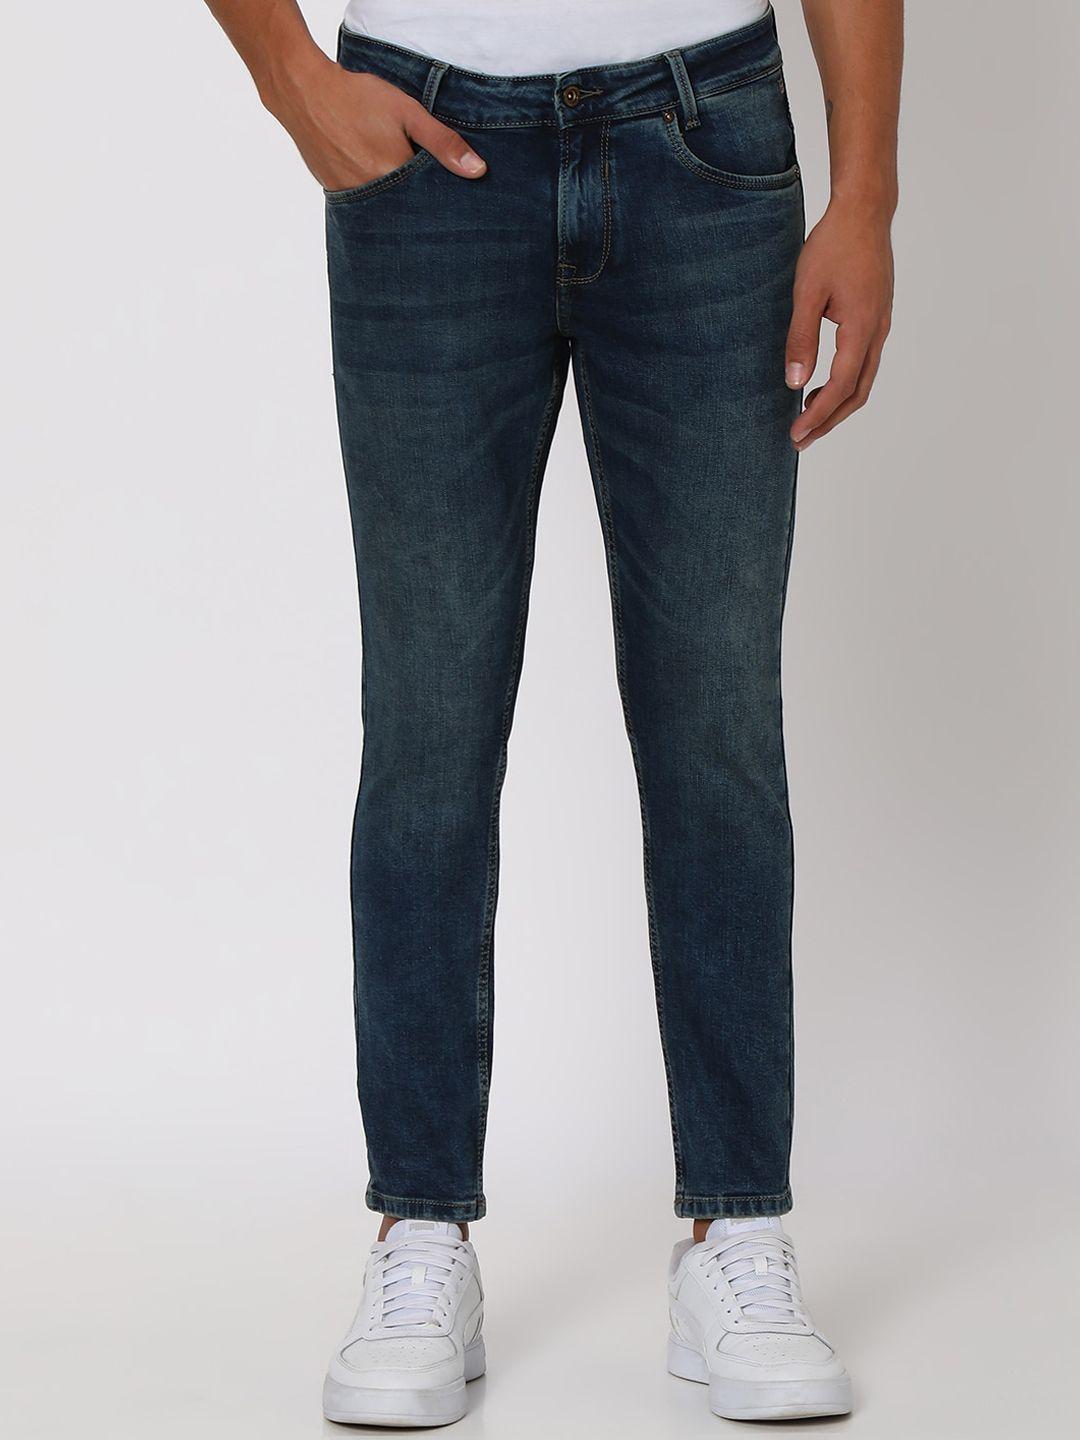 mufti-men-slim-fit-mid-rise-dark-shade-clean-look-stretchable-jeans